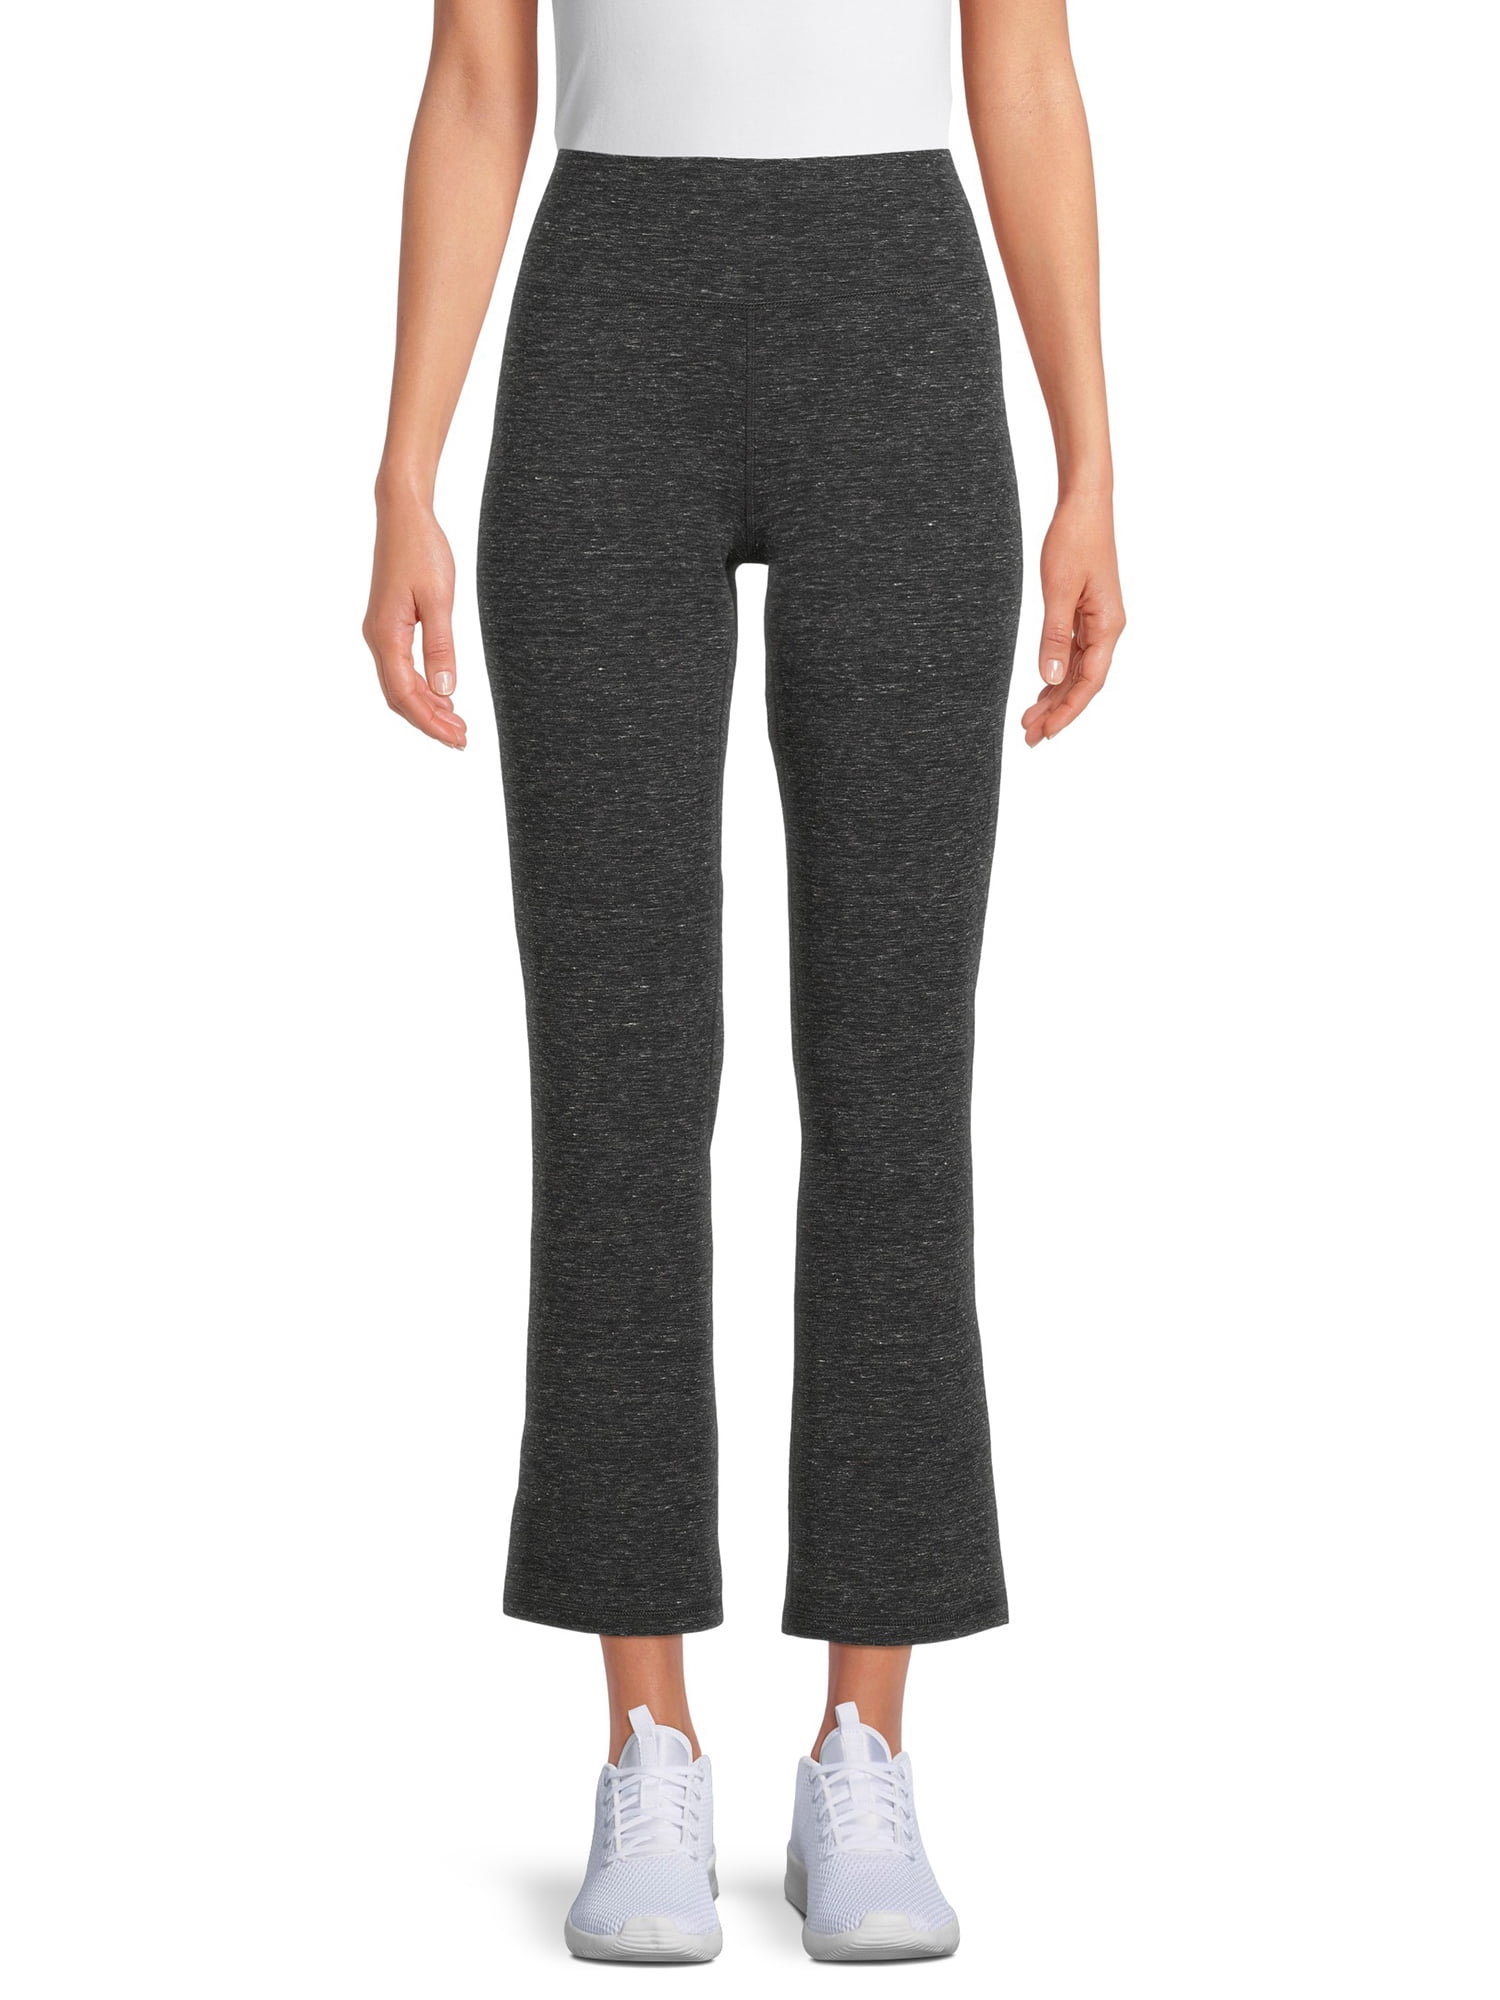 Athletic Works Women's Athleisure Performance Straight Leg Pant Available  in Regular and Petite - Walmart.com